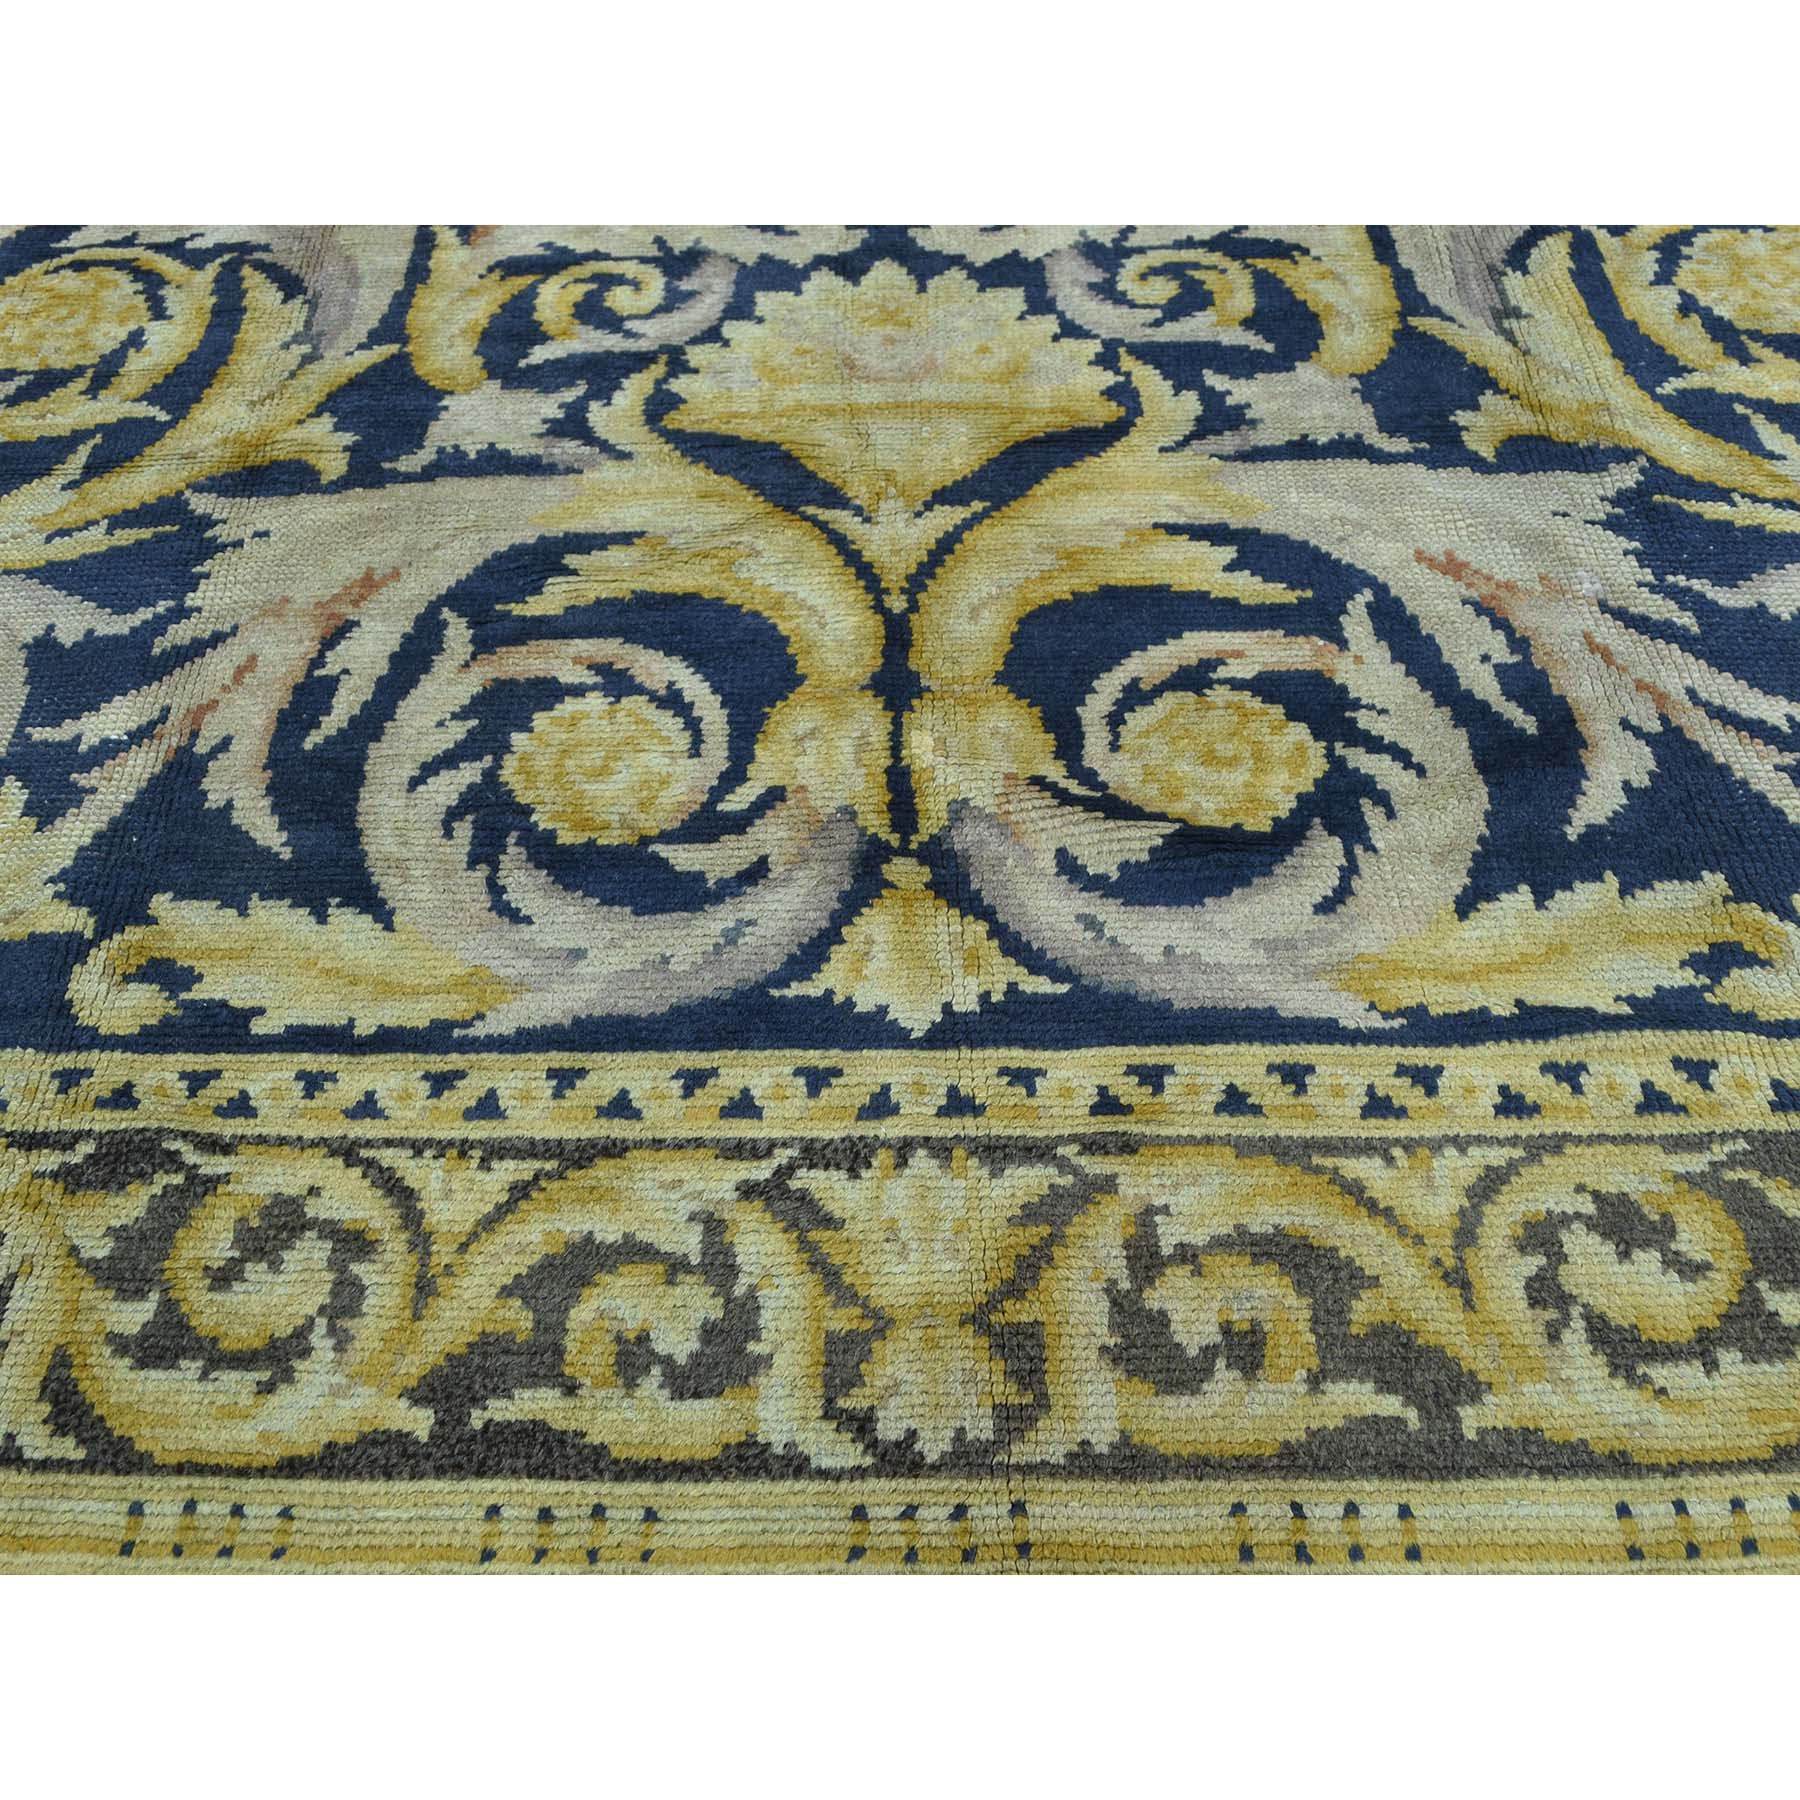 10'10"x13'8" Old Spanish Savonnerie Exc Cond Hand Woven Oversize Rug 